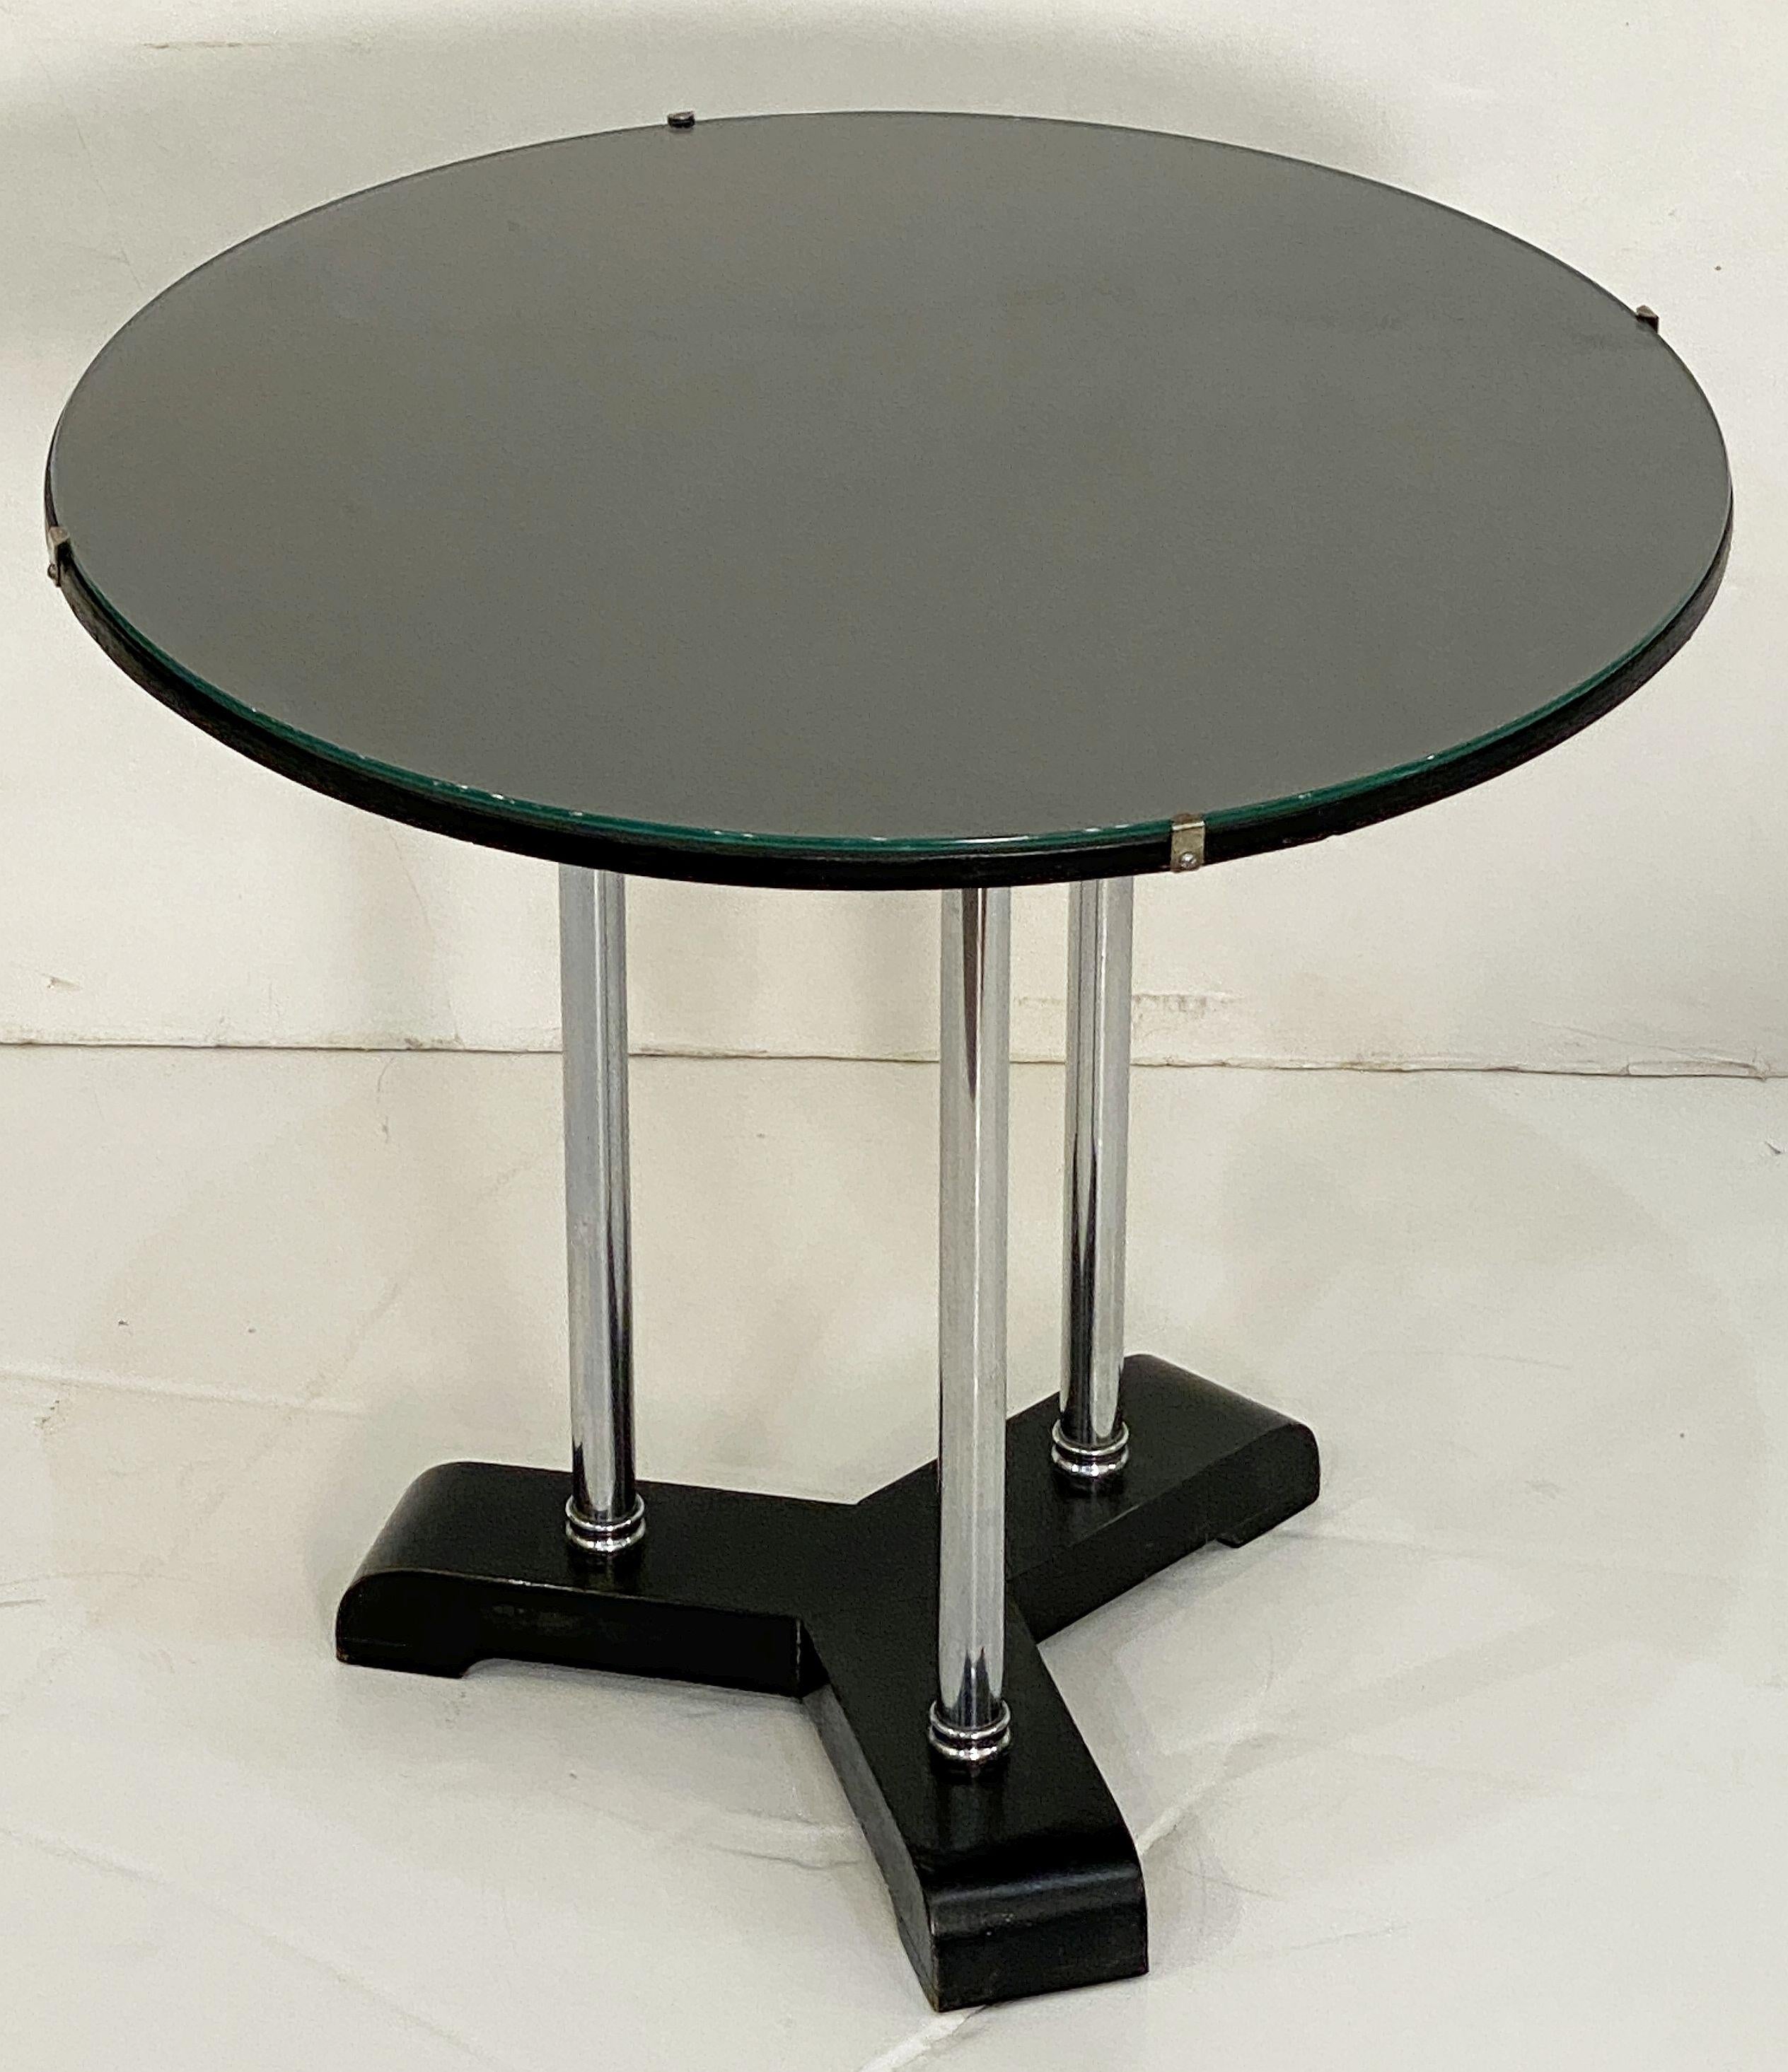 English Art Deco Round Drinks Tripod Table of Chrome, Ebonized Wood, and Glass In Good Condition For Sale In Austin, TX